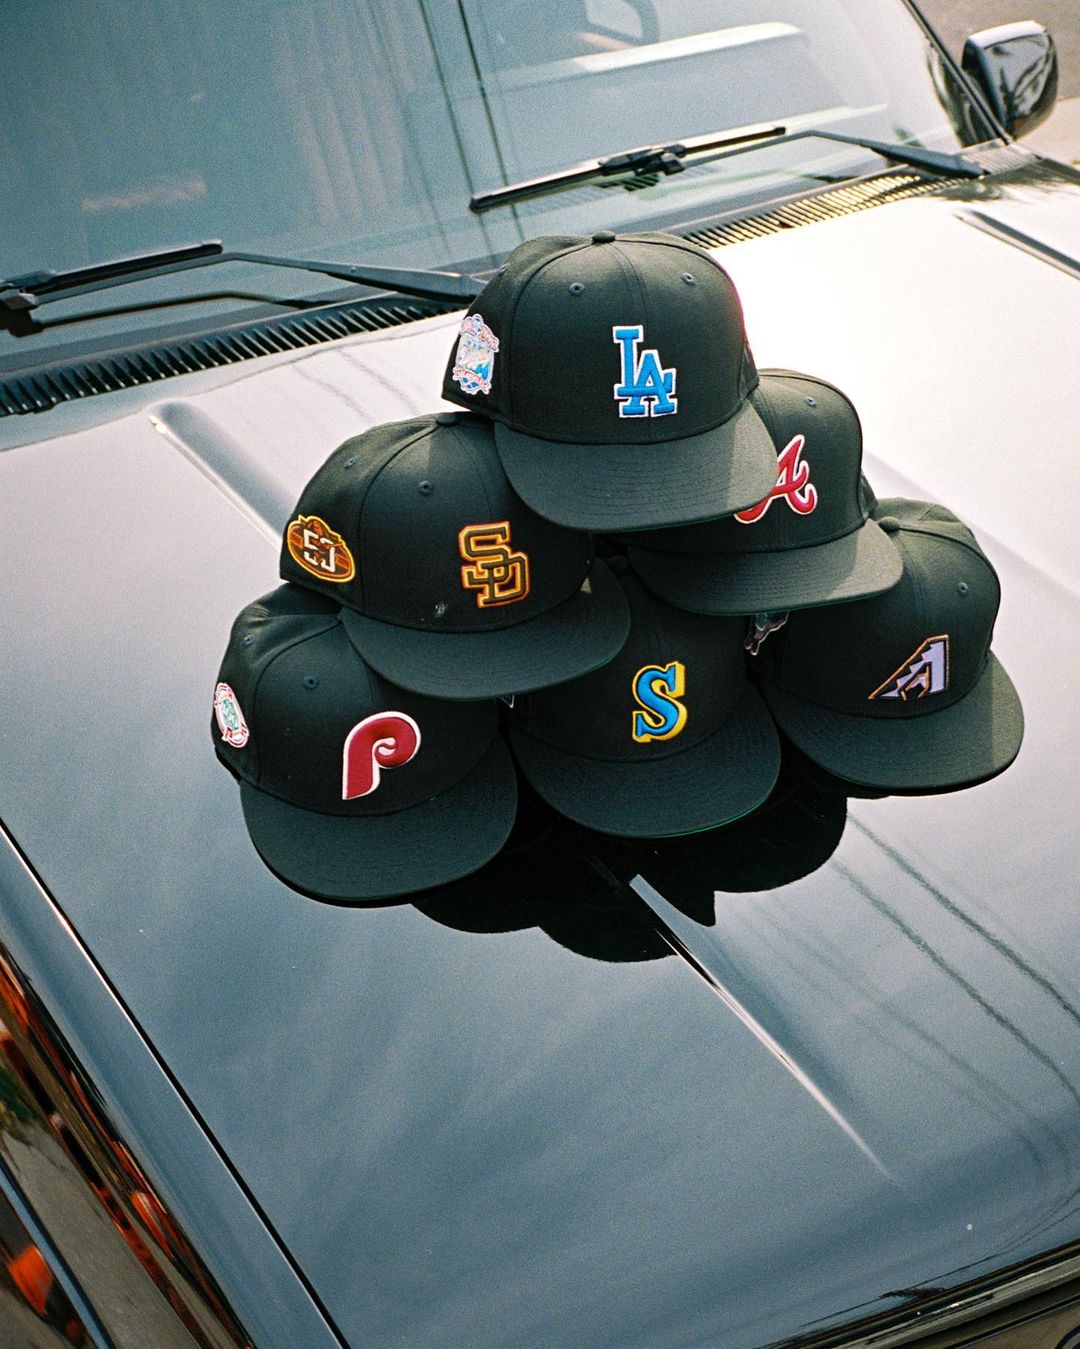 Black Dome Fitted Hats